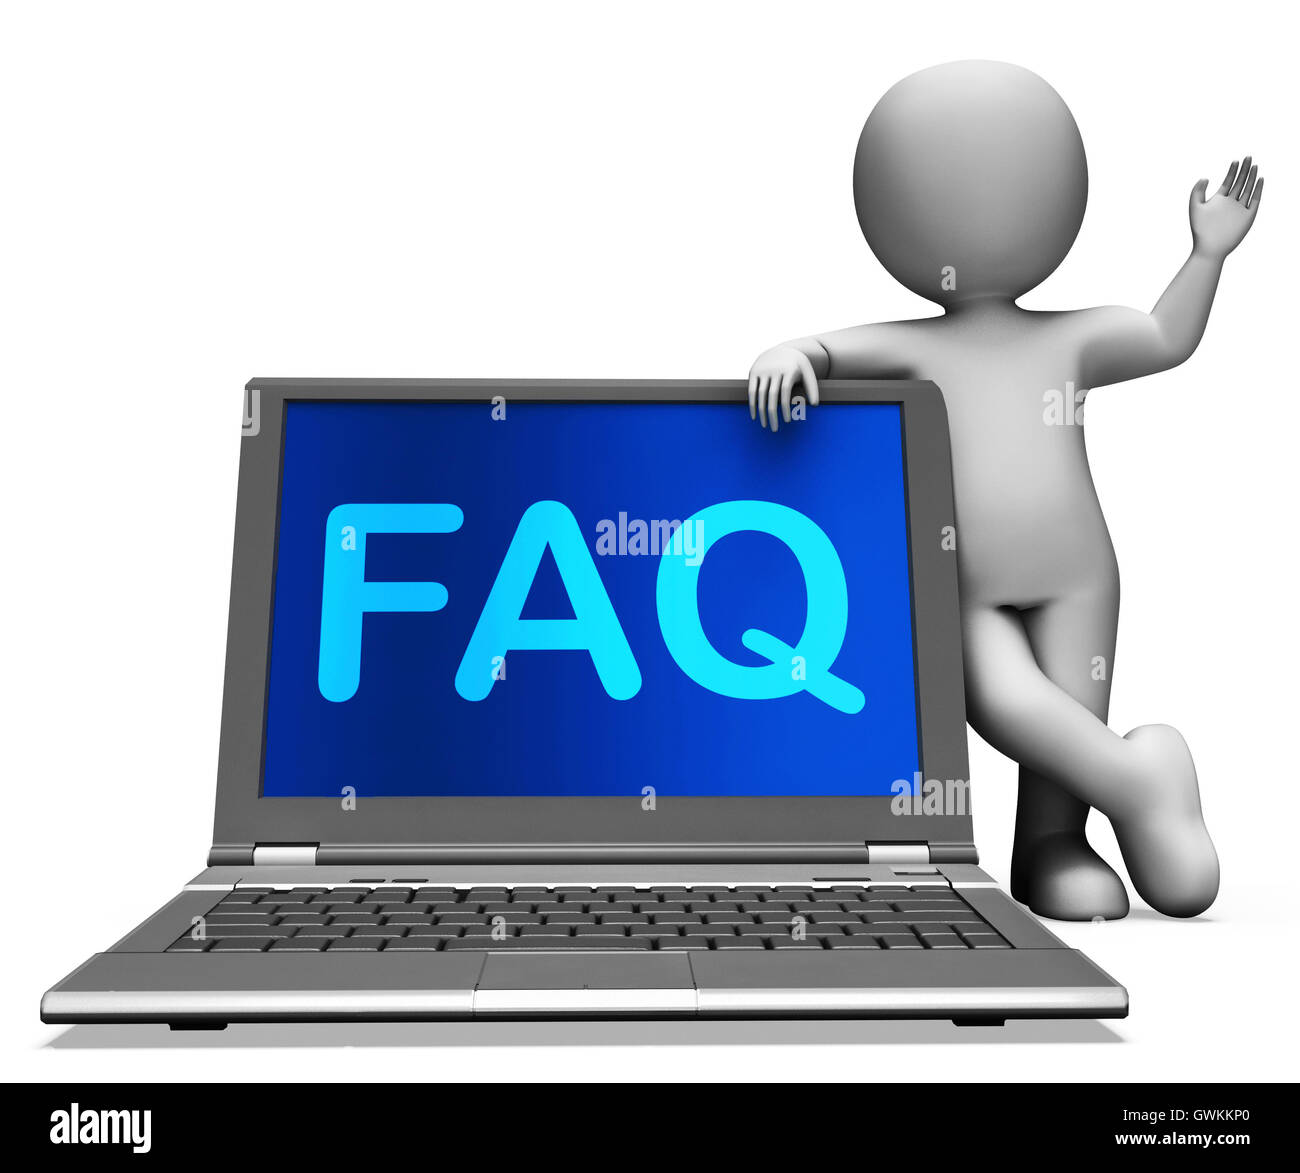 Faq Laptop e carattere mostra soluzione e Frequently Asked Que Foto Stock